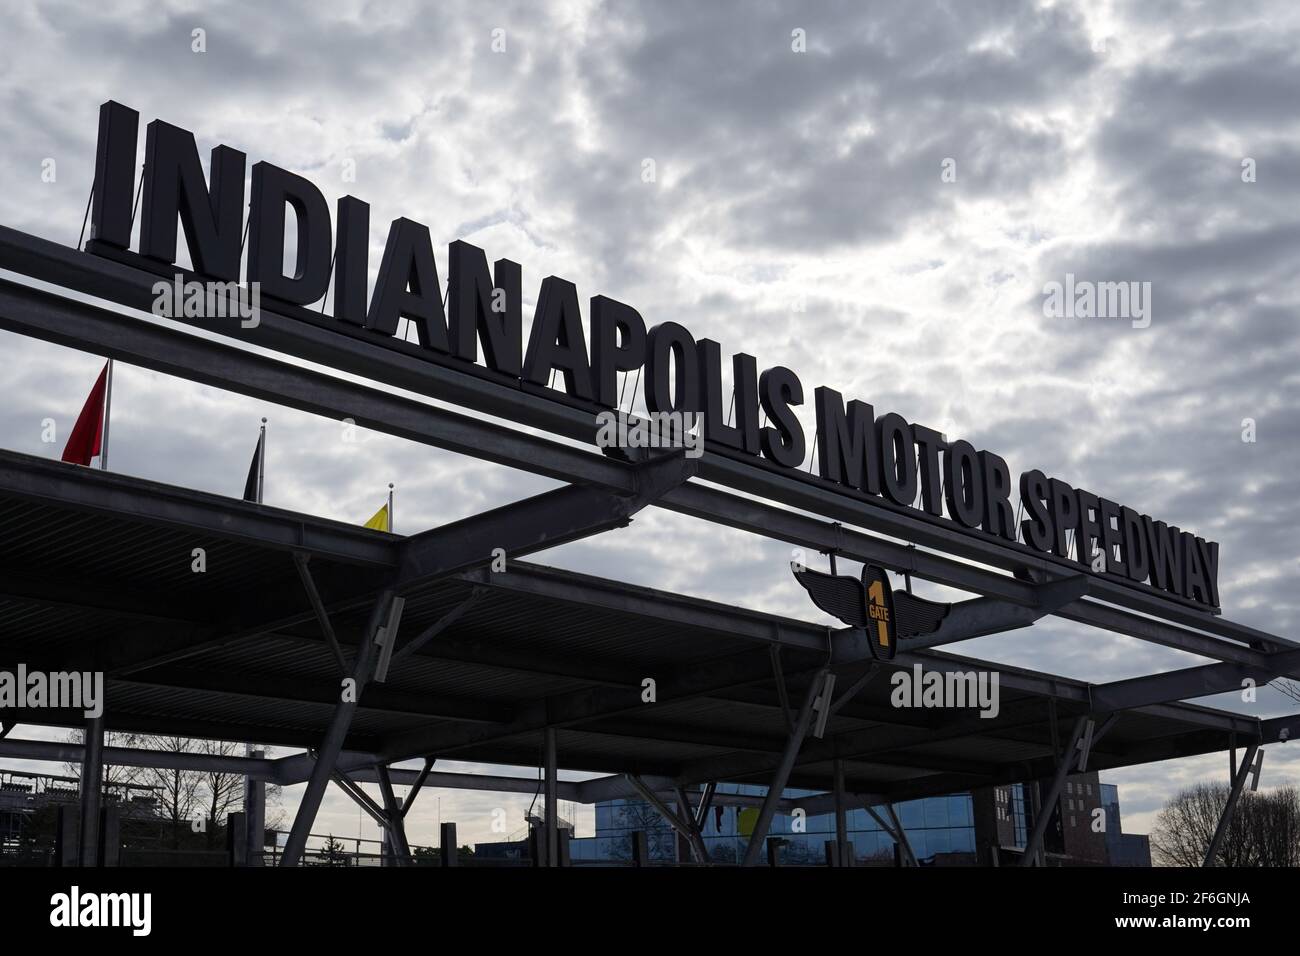 A general view of the Indianapolis Motor Speedway entrance, Monday, March 22, 2021, in Speedway, Ind. It is the home of the Indianapolis 500 and the B Stock Photo